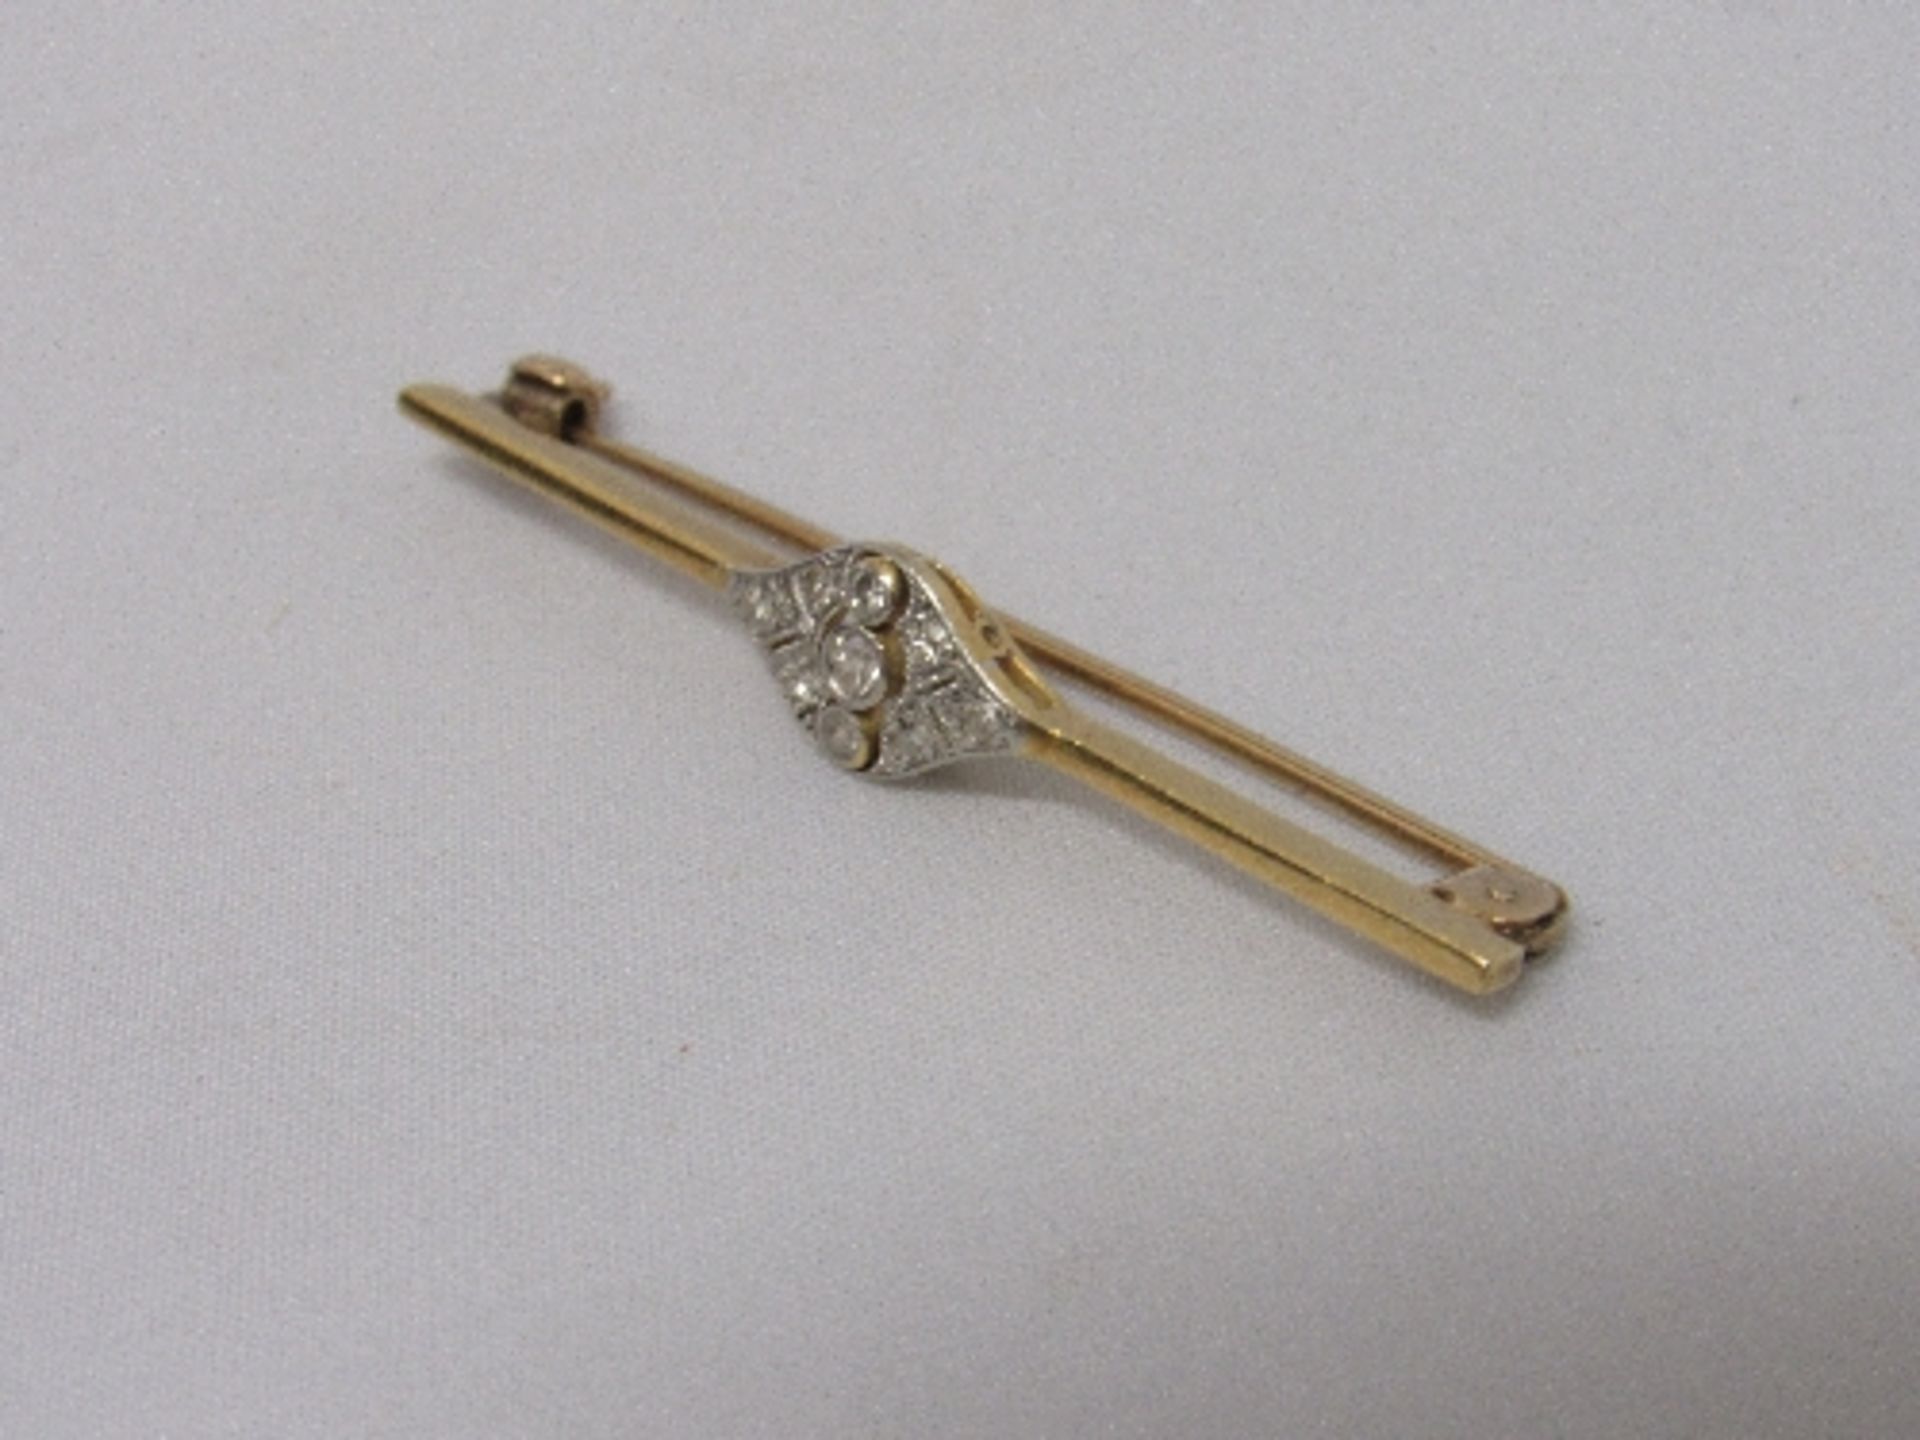 Diamond & gold coloured metal tie-pin, weight 3.9gms. Estimate £80-100. - Image 2 of 3